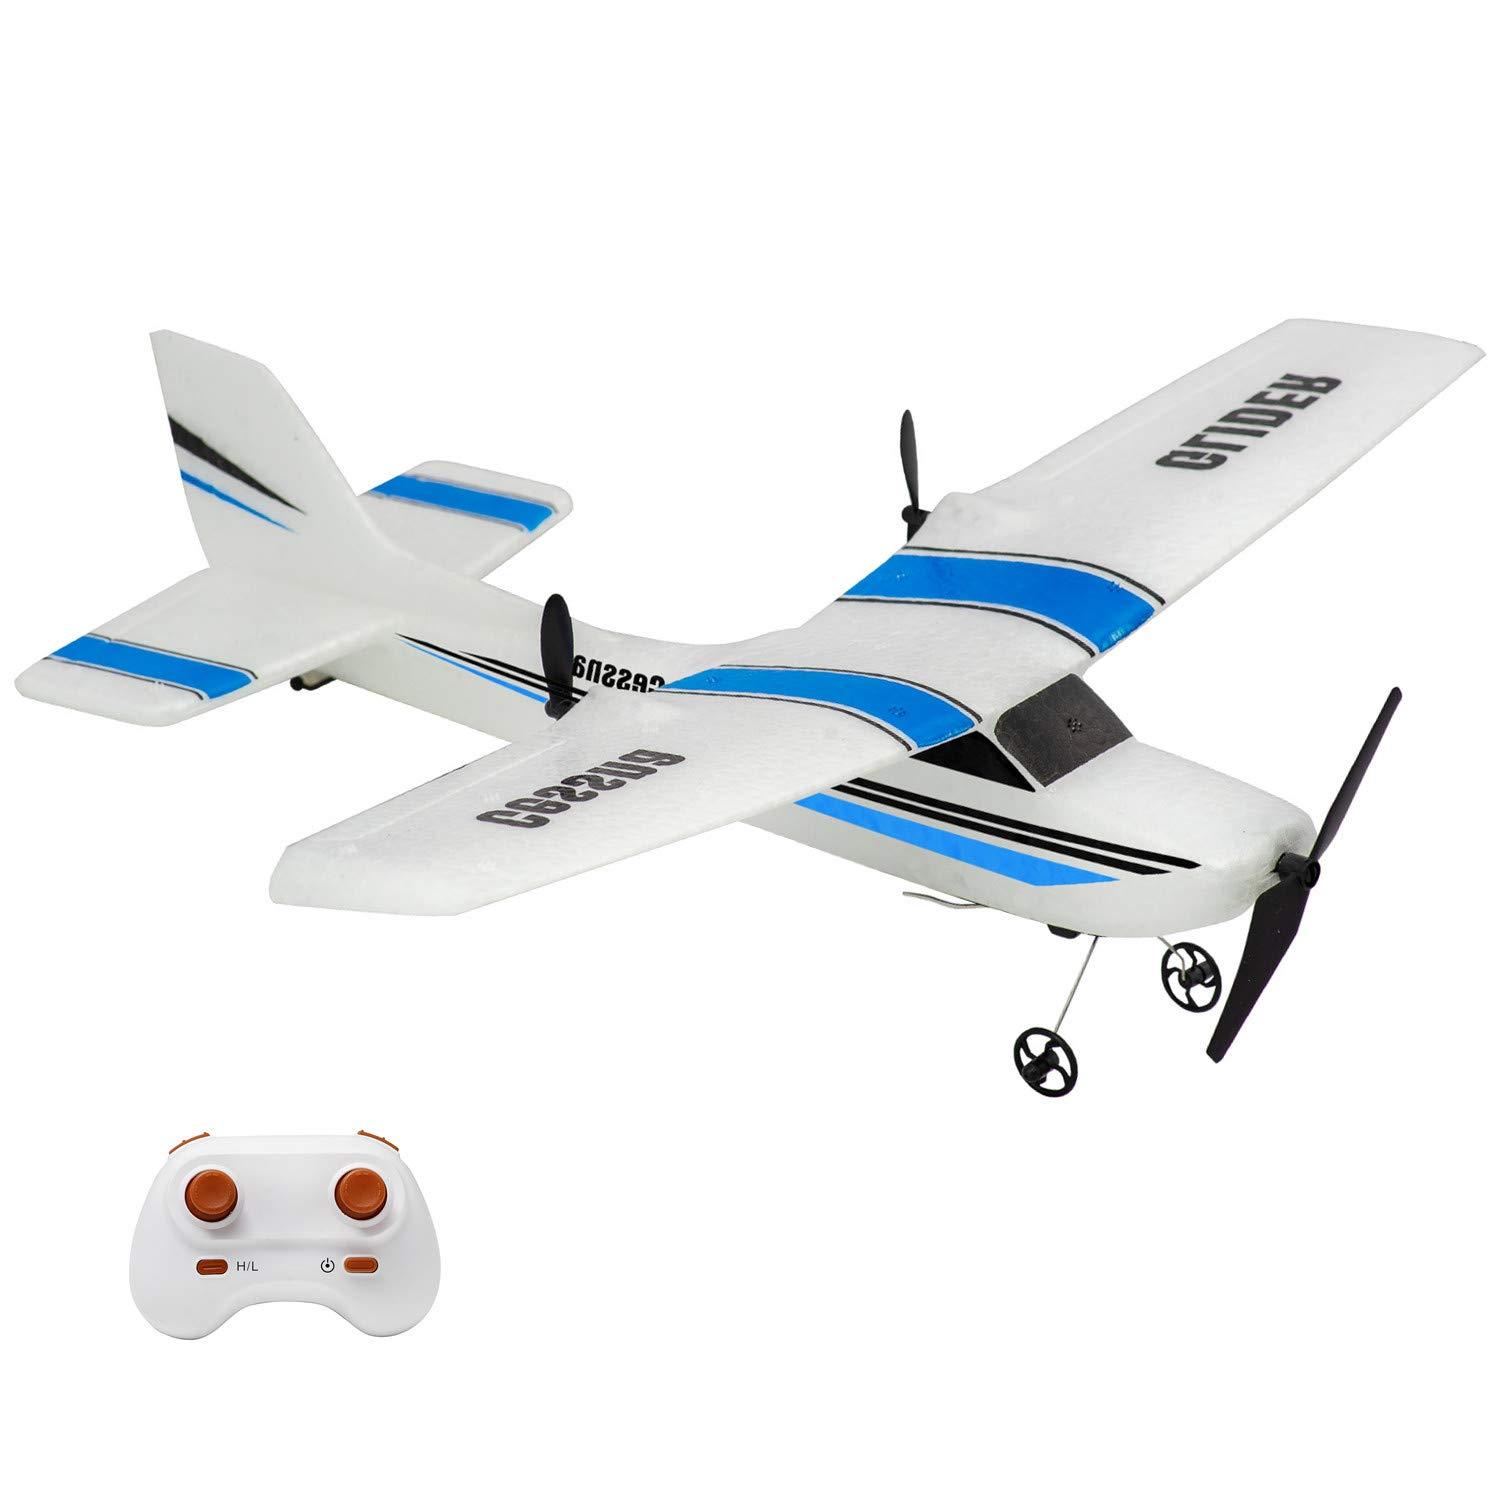 2 Channel Rc Airplane: 2 Channel RC Airplanes: Fun & Versatile Options for All Pilots